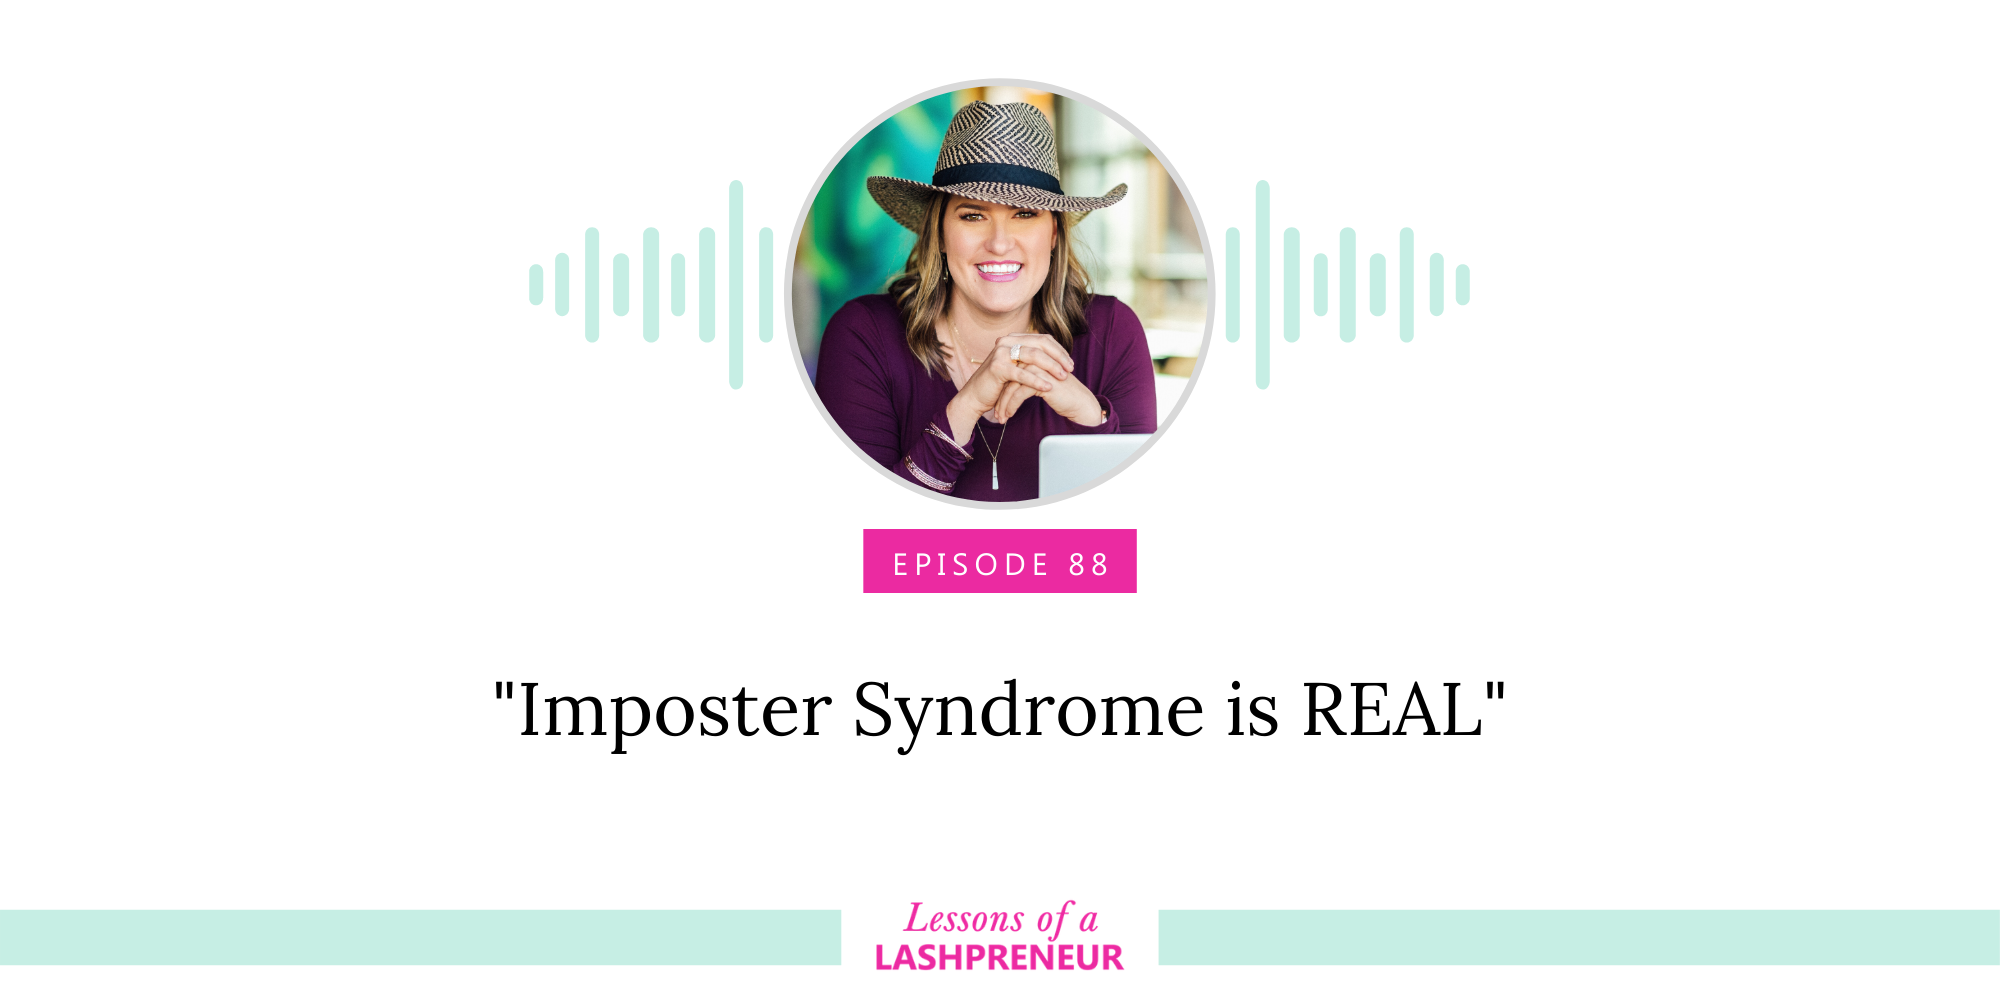 Imposter Syndrome is REAL